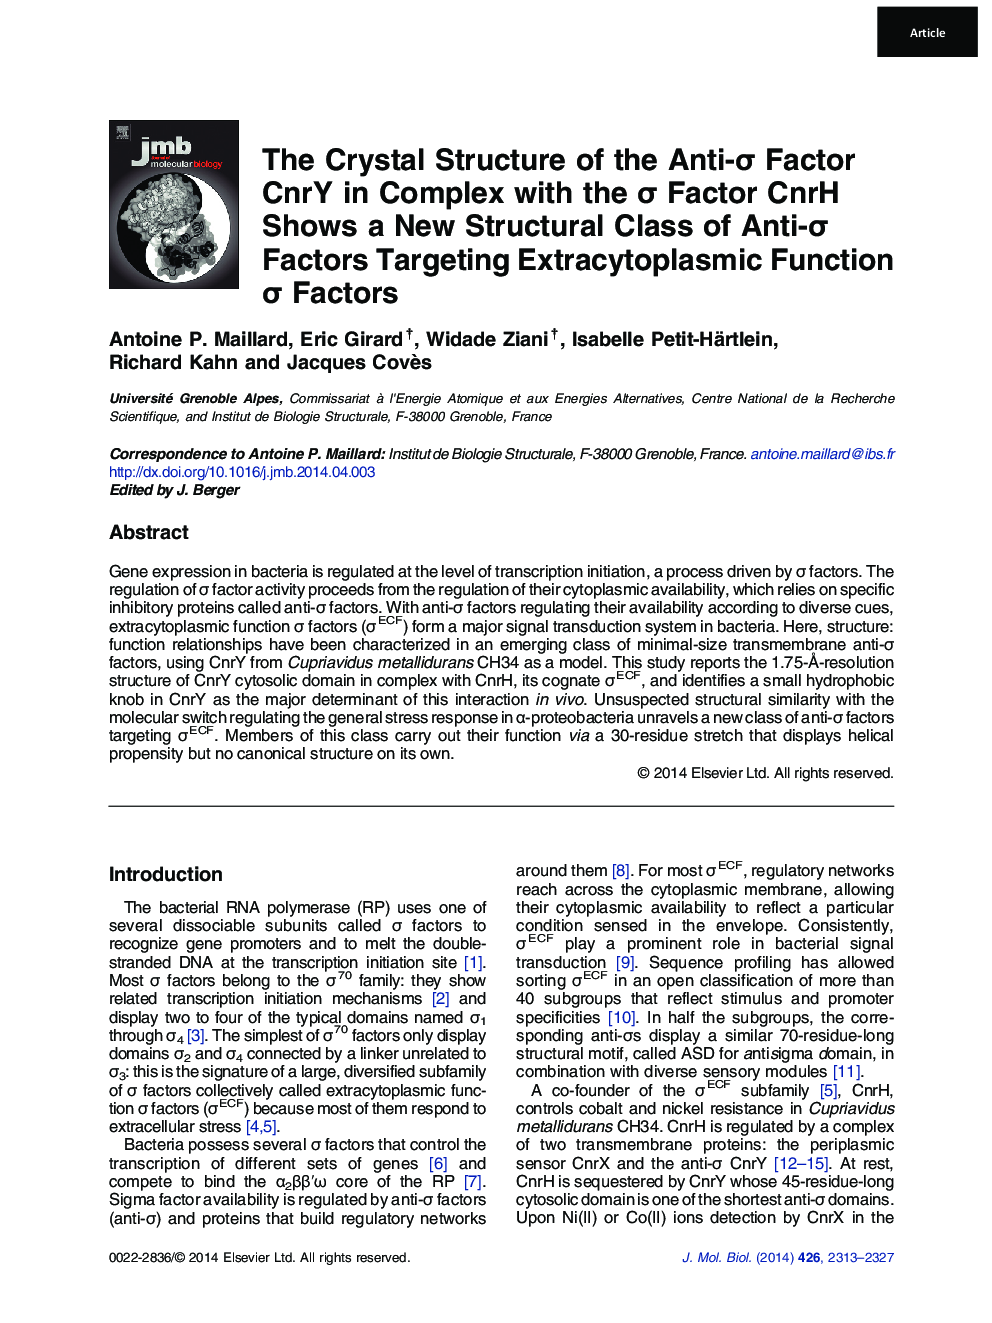 The Crystal Structure of the Anti-σ Factor CnrY in Complex with the σ Factor CnrH Shows a New Structural Class of Anti-σ Factors Targeting Extracytoplasmic Function σ Factors